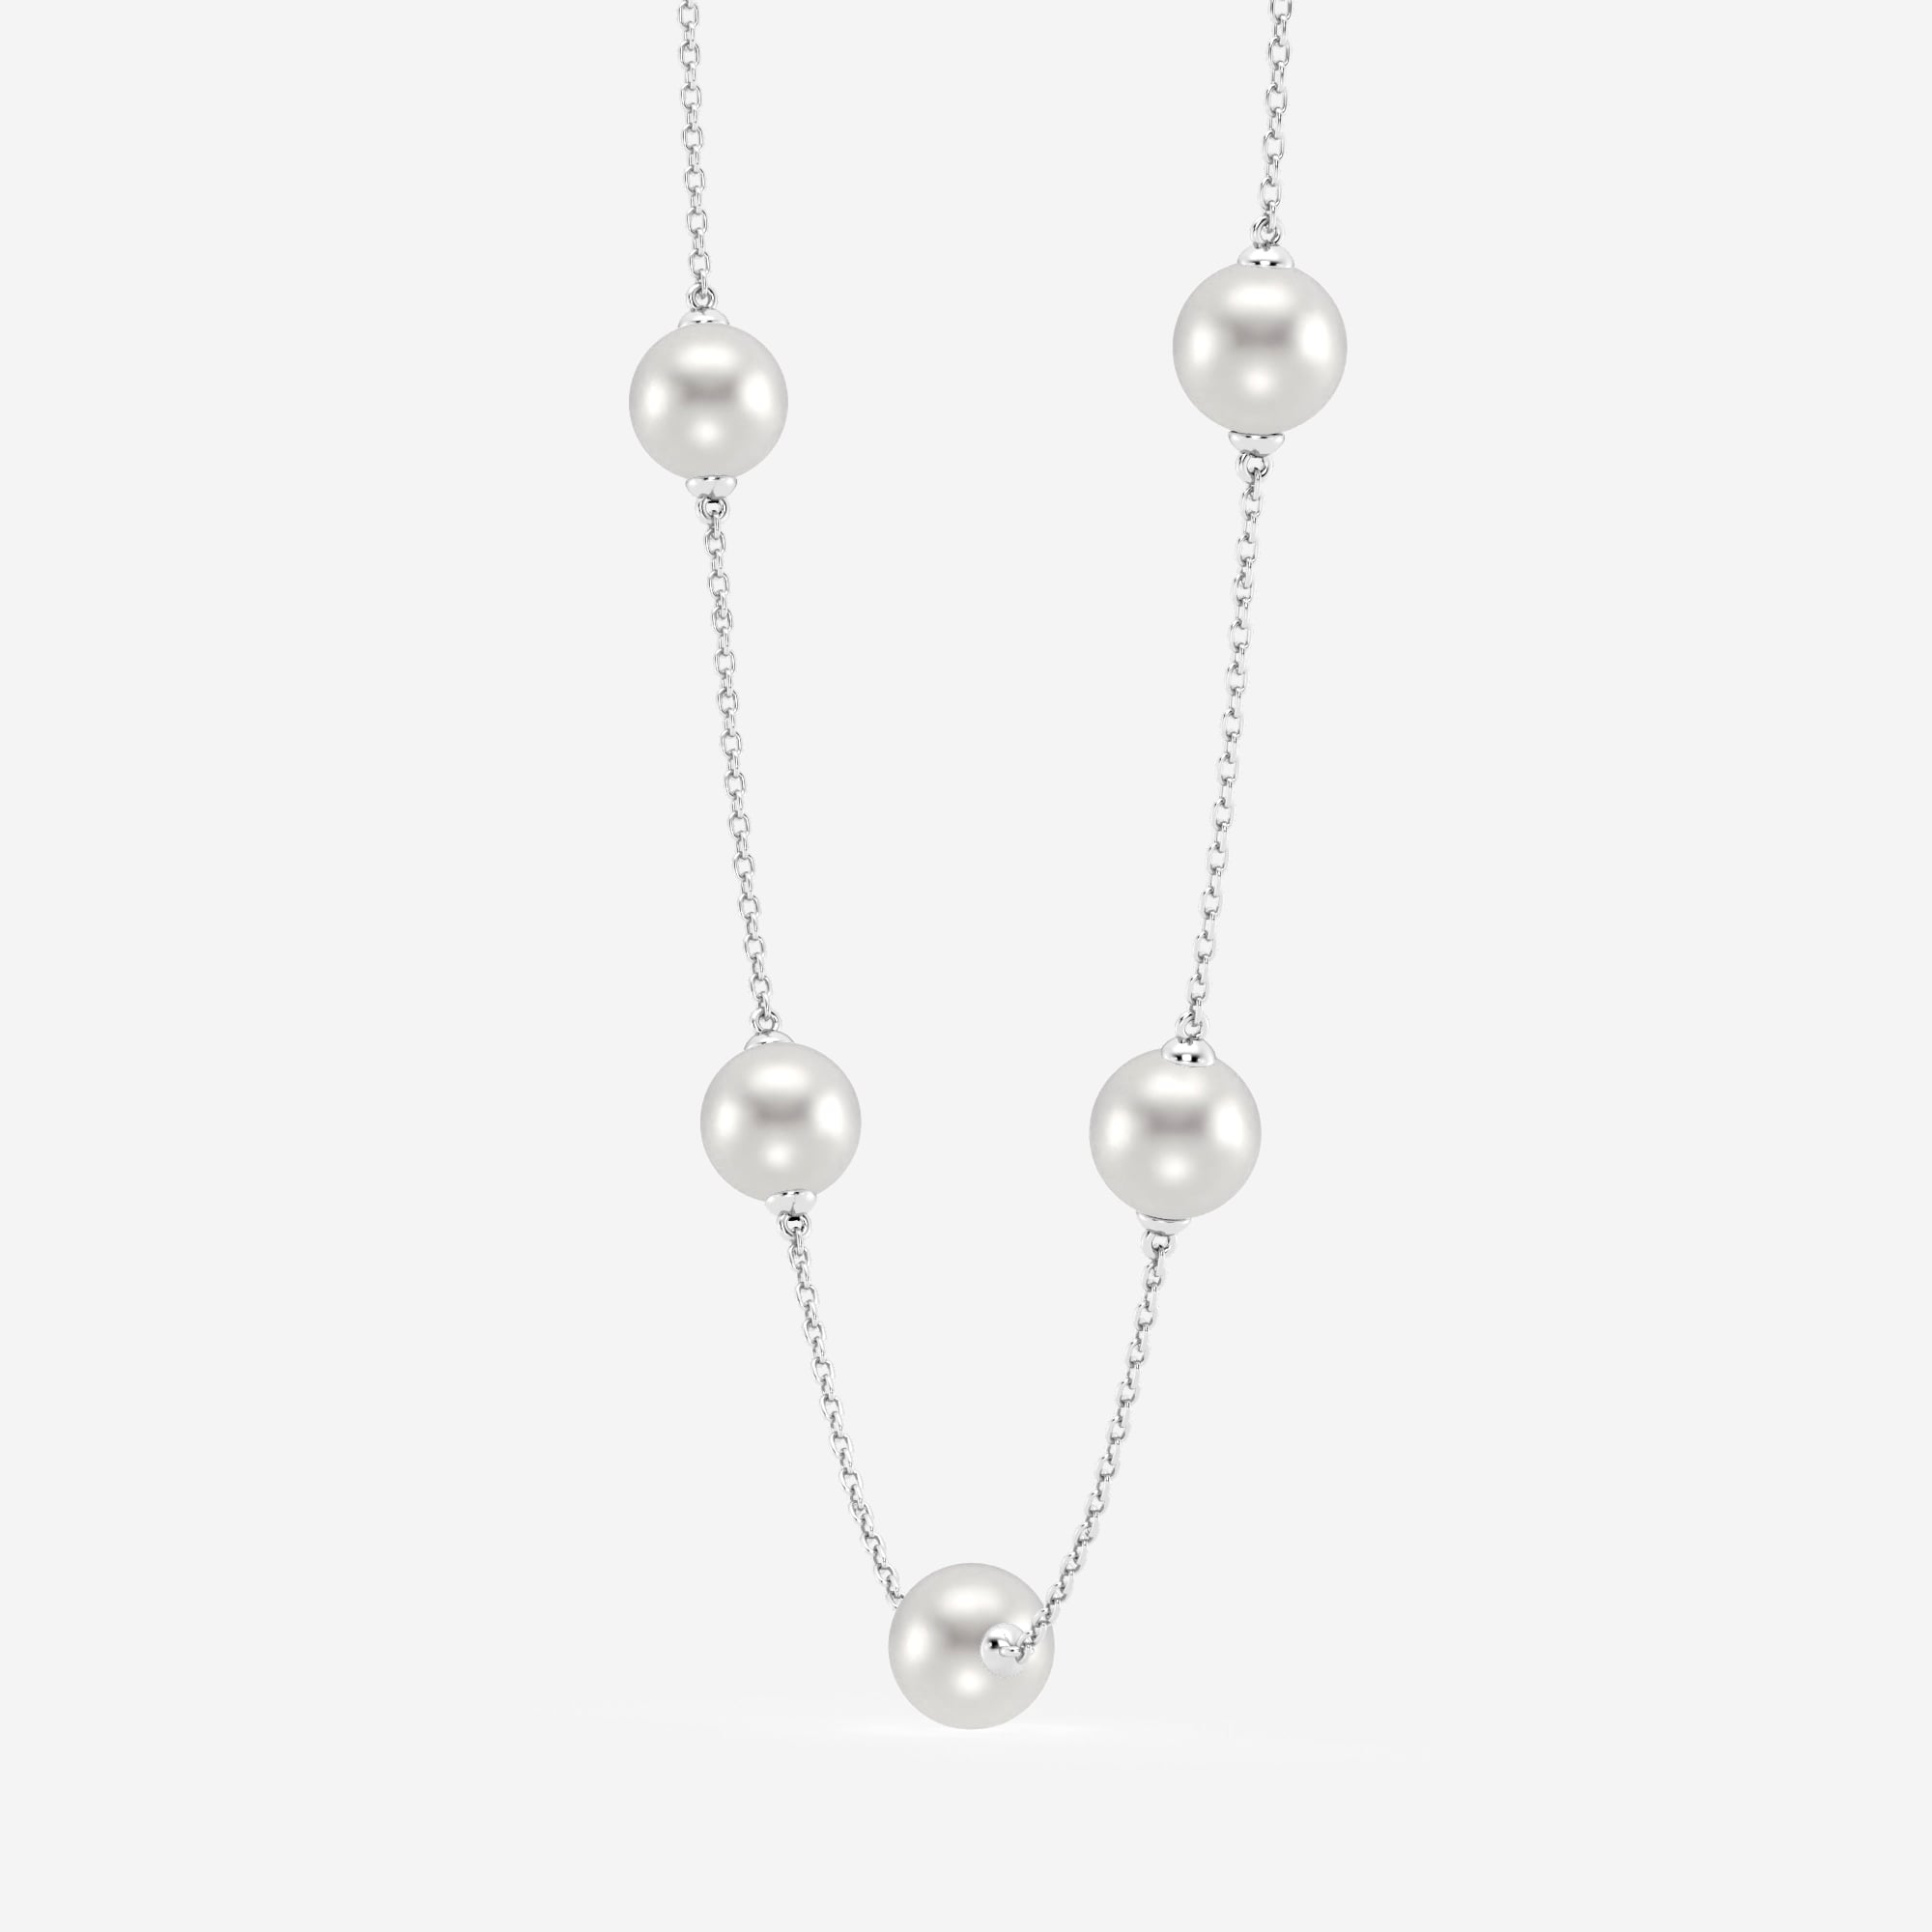 product video for 5.5 - 6.0 mm Cultured Freshwater Pearl Station Fashion Necklace